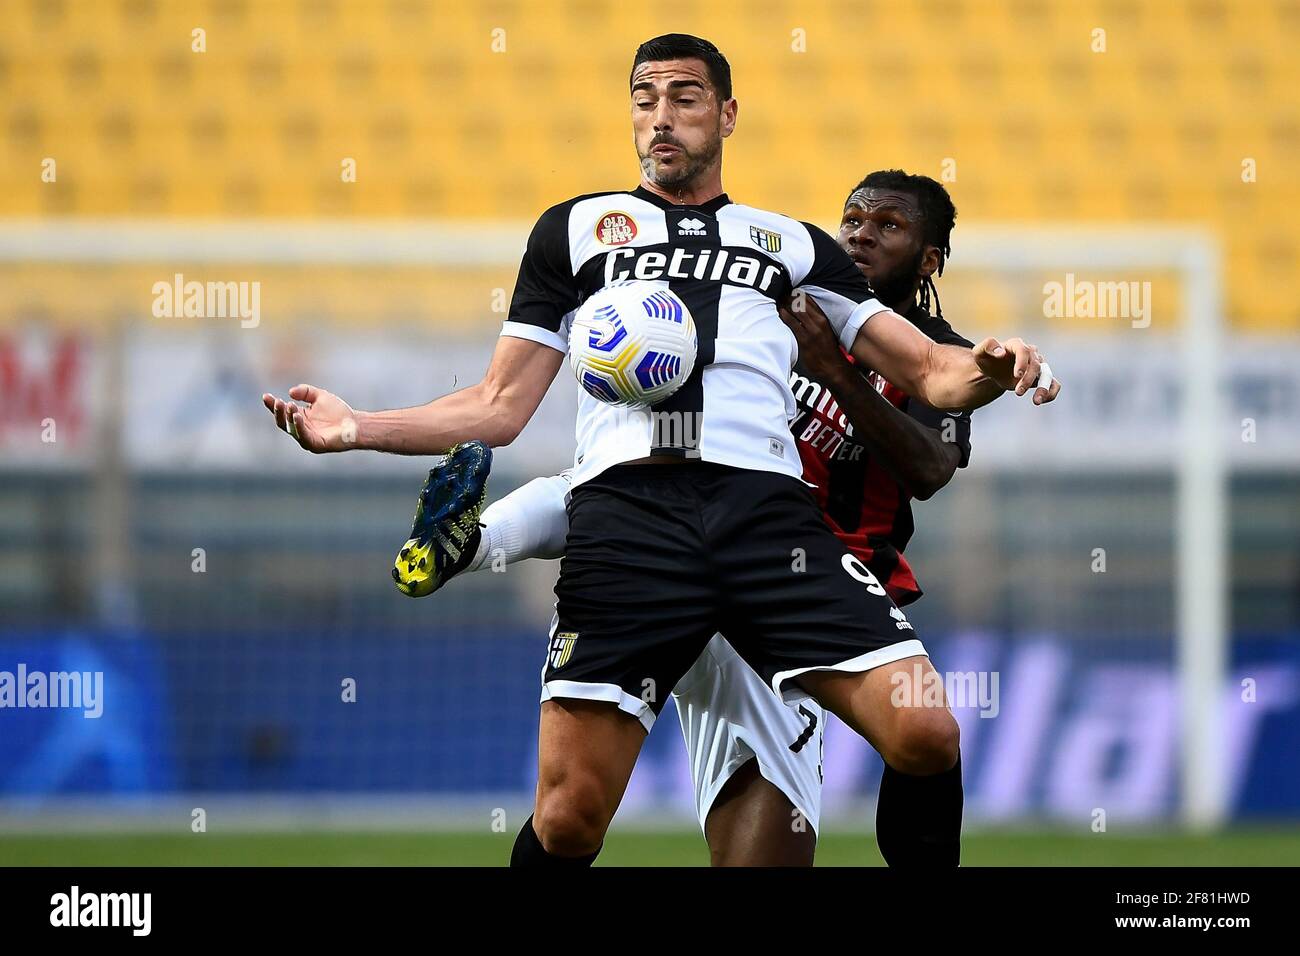 Parma, Italy - 10 April, 2021: Graziano Pelle of Parma Calcio is challenged  by Franck Kessie of AC Milan during the Serie A football match between  Parma Calcio and AC Milan. AC